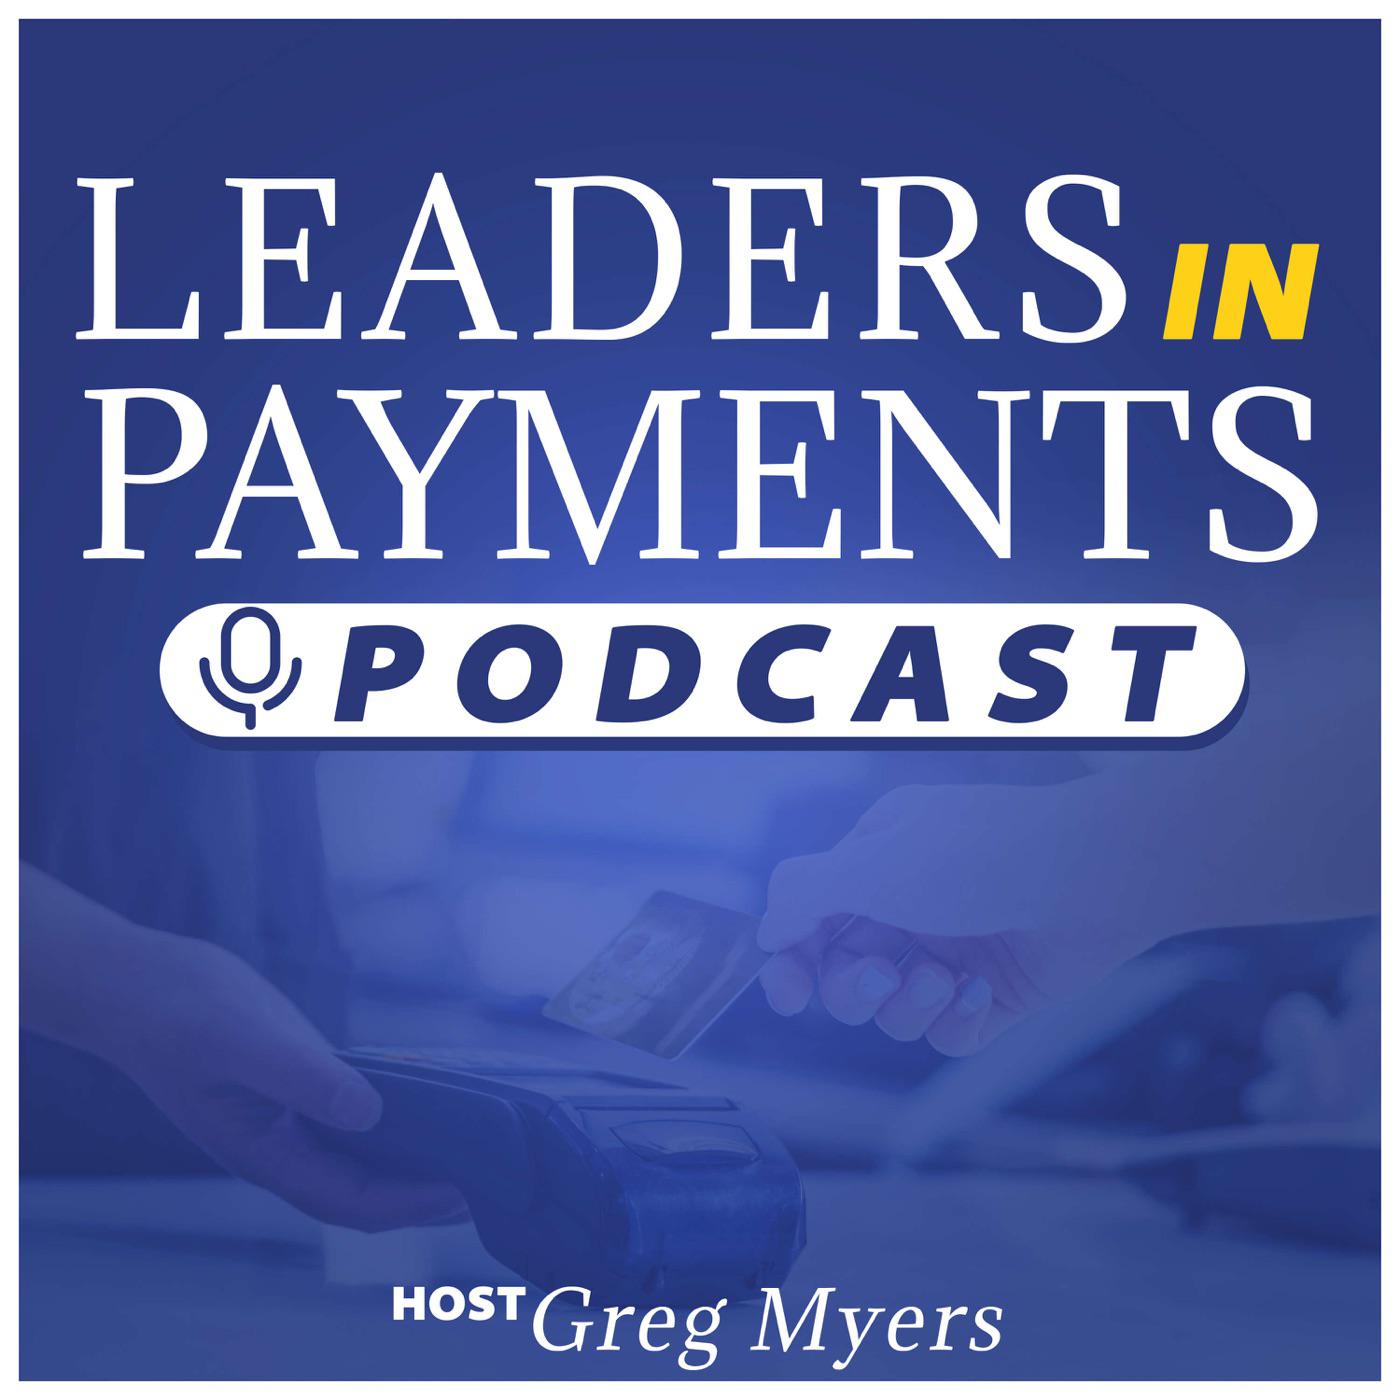 leaders-in-payments-greg-myers-oxtyaXdHDVw-dWDRYbe3AQE.1400×1400